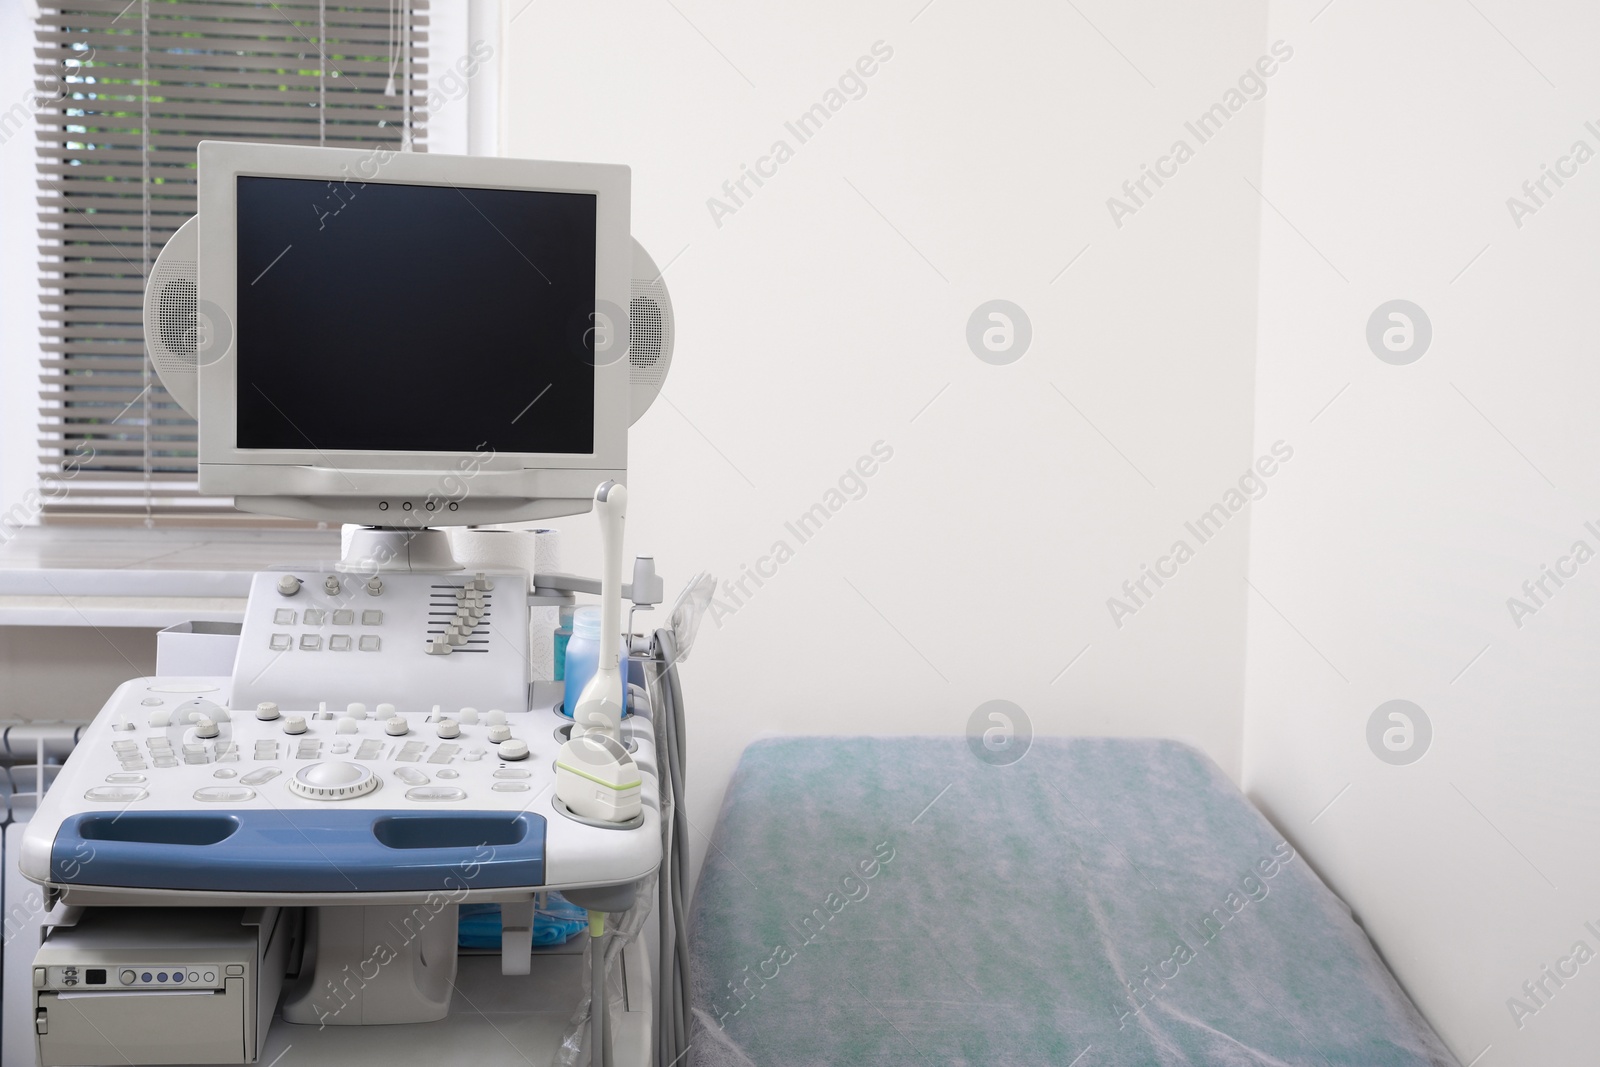 Photo of Ultrasound machine and examination table in hospital. Space for text